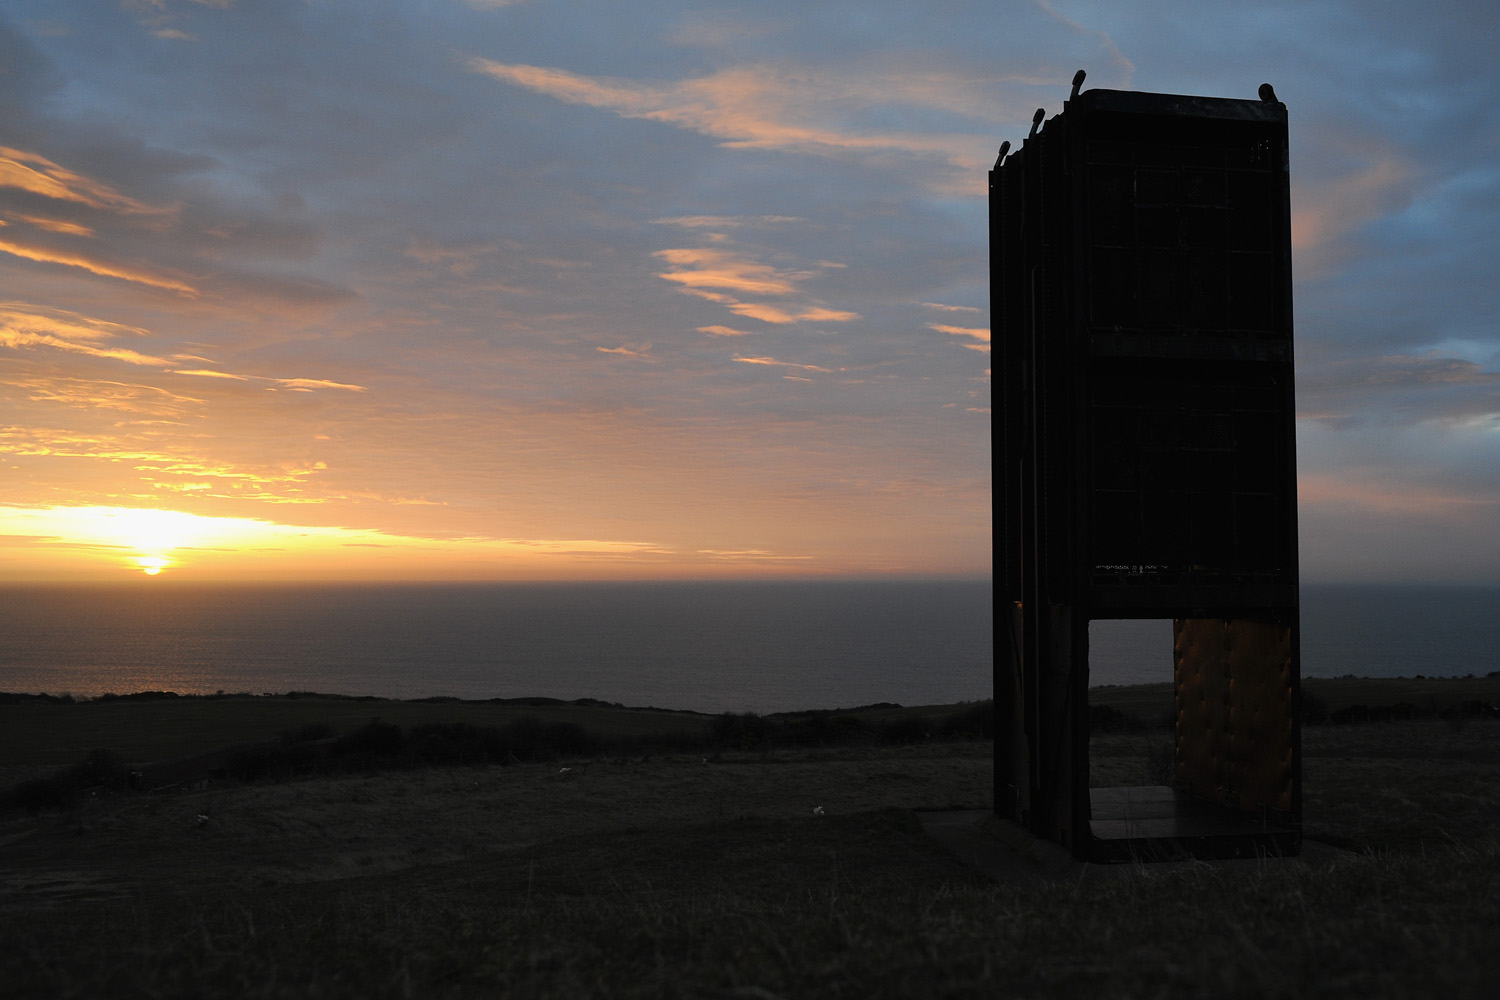 April 17, 2013. The sun rises behind a former pit cage from Easington Colliery, the only reminder on the site of the pit at Easington in England. Former miners and their families held a commemoration party for the closure of the pit at Easington Colliery.